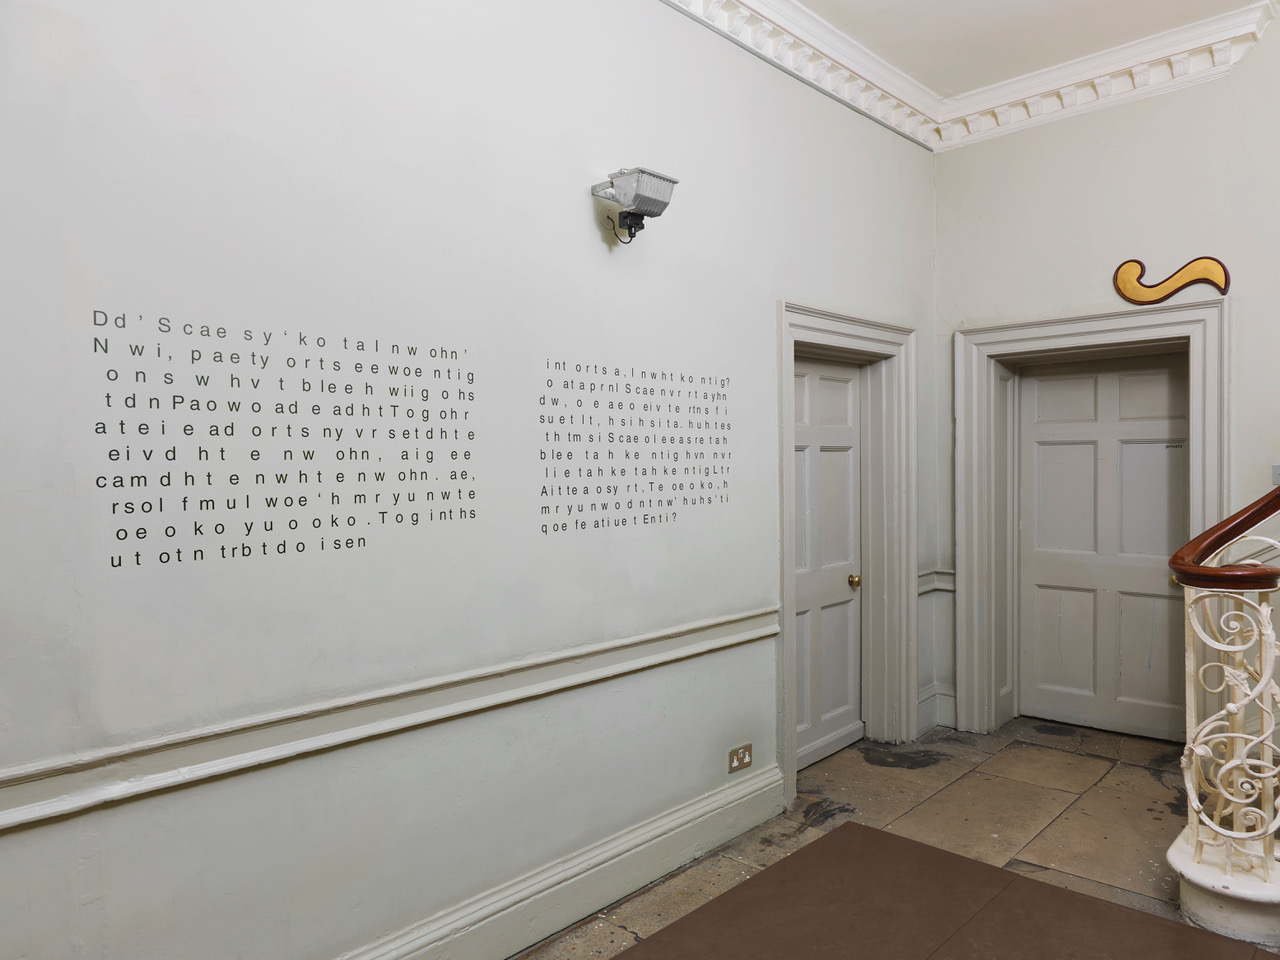 Nicky Hirst 'The Electorate', 'Half Listening' paired vinyl lettering, 56×220cm 2020, on left and 'Swung Dash' fabric and plastic, 26×46cm 2020 on right, installation photography by Andy Keate